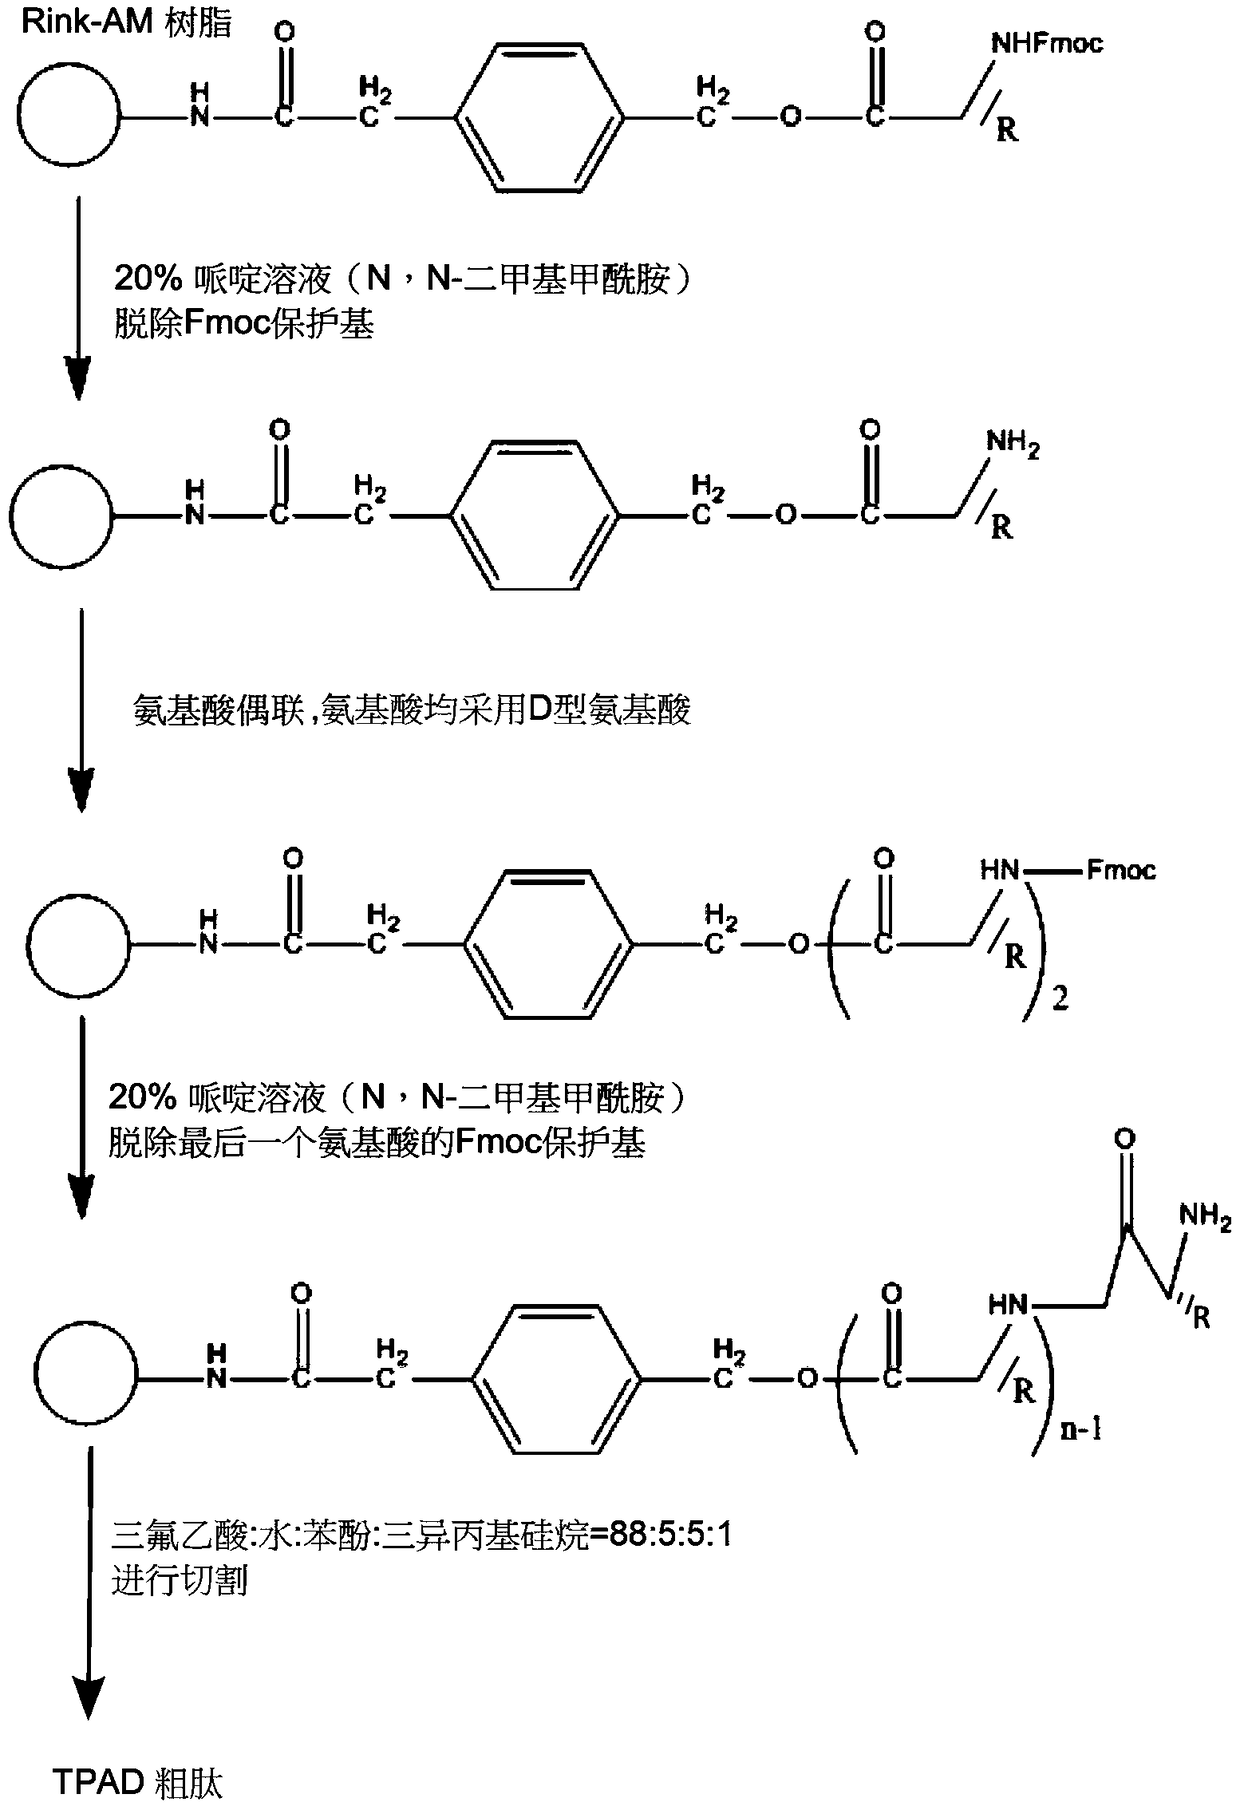 Antimicrobial peptide synthesis method with all amino acids being D-type amino acids